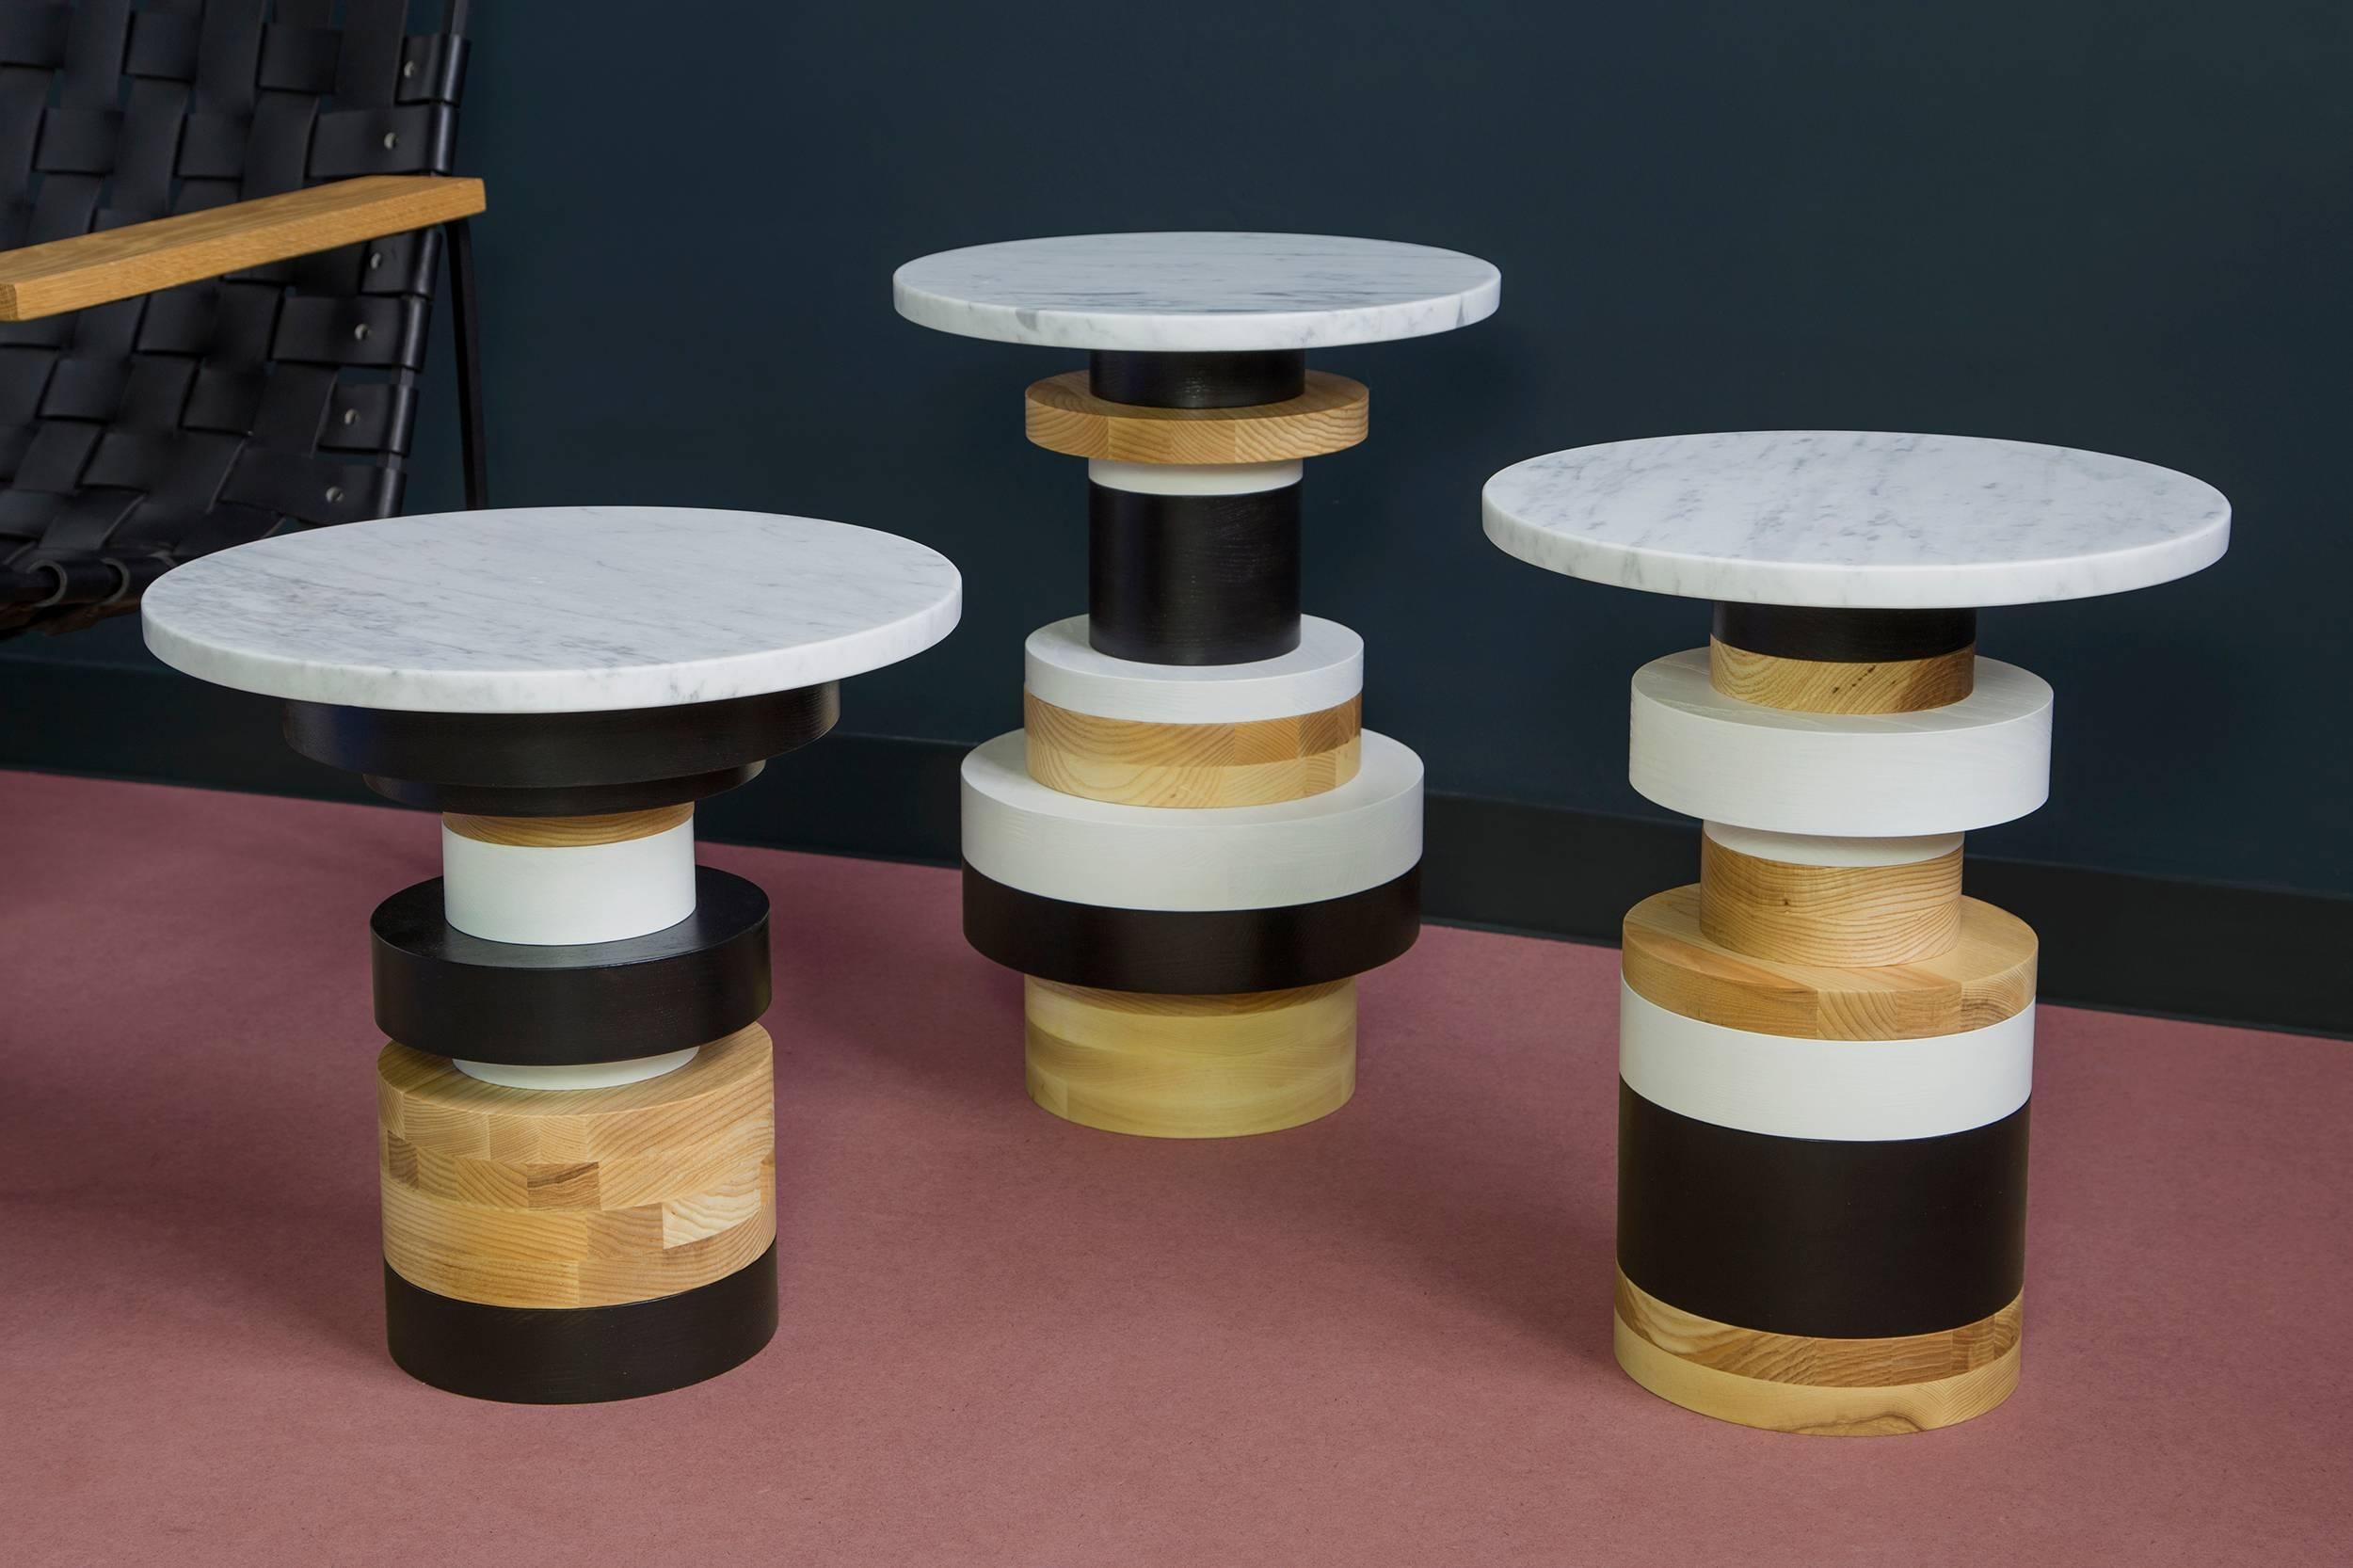 The Sottsass inspired “Sass Tables” are simple, sculptural accents for any interior space. Made from stacked wooden bases and a honed marble-top, Sass tables are perfect individually or clustered. Measures: 18 inches tall with 14 inch marble-top.